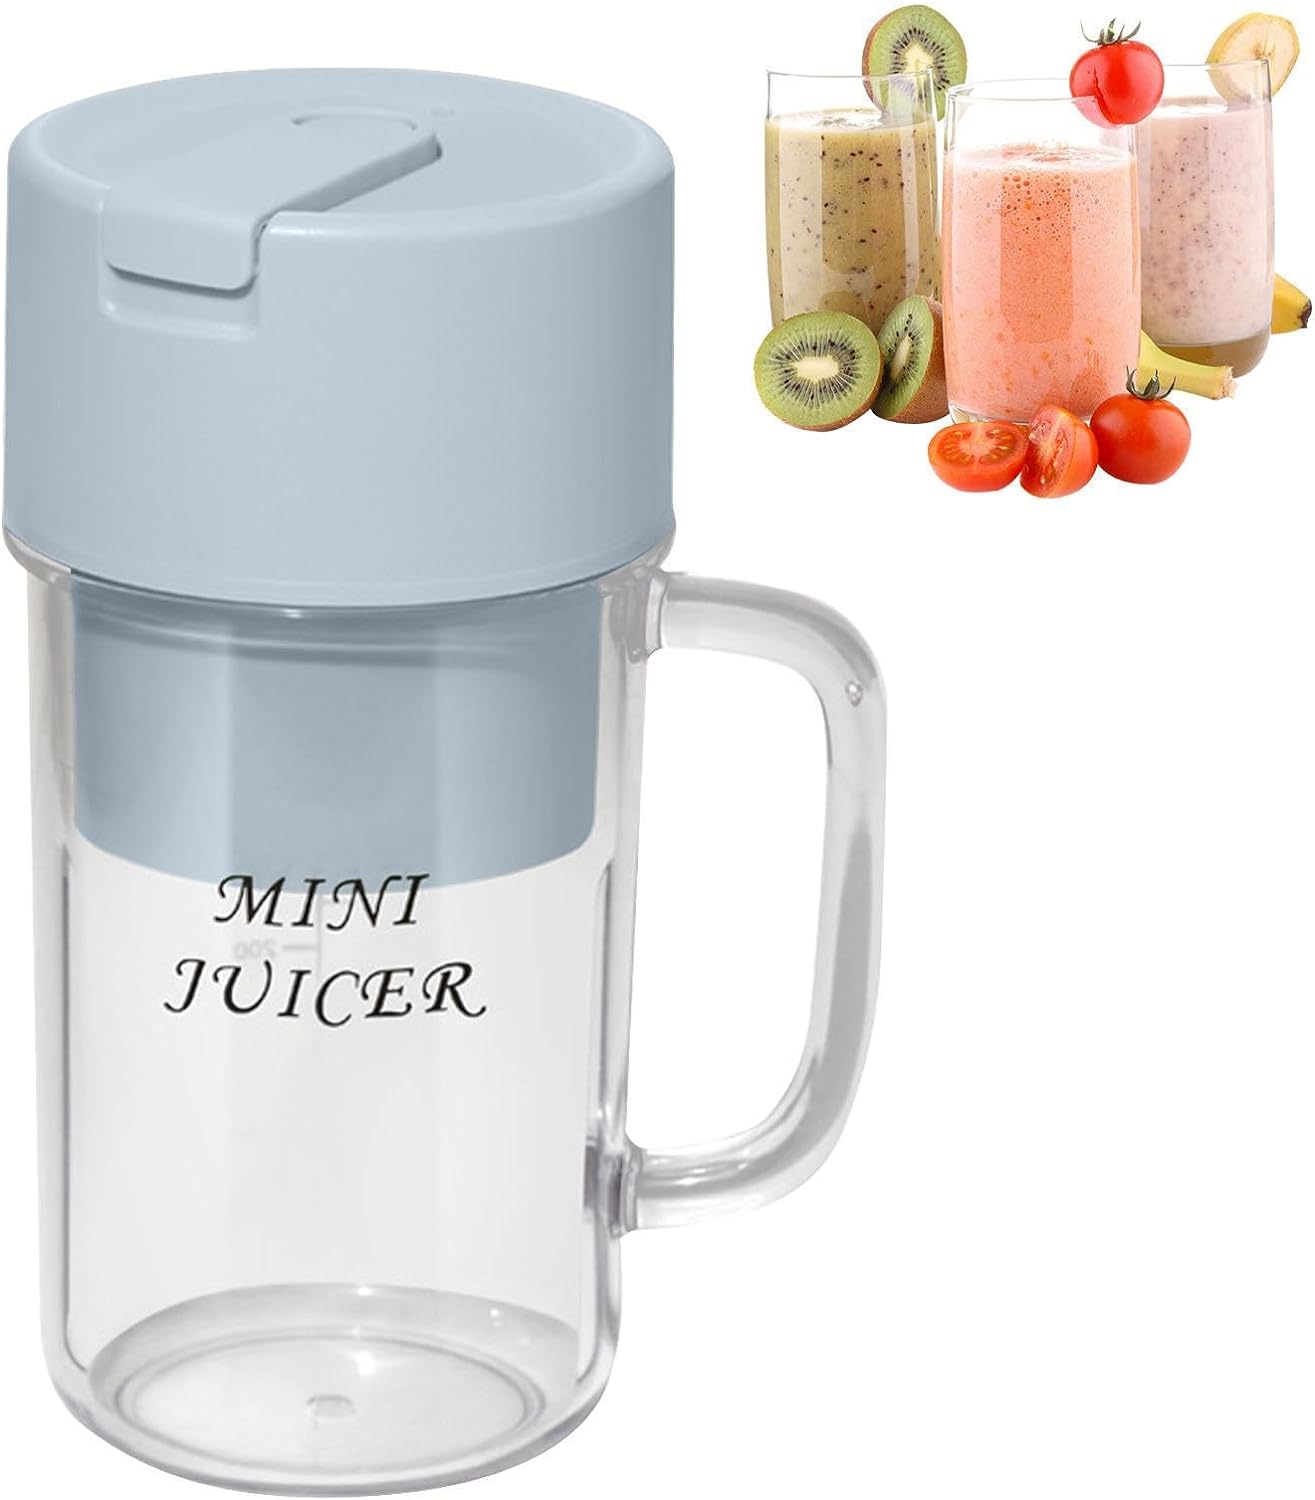 Blend on the Move: Rechargeable Electric Juicer for Fresh Fruit Smoothies Anywhere You Go!